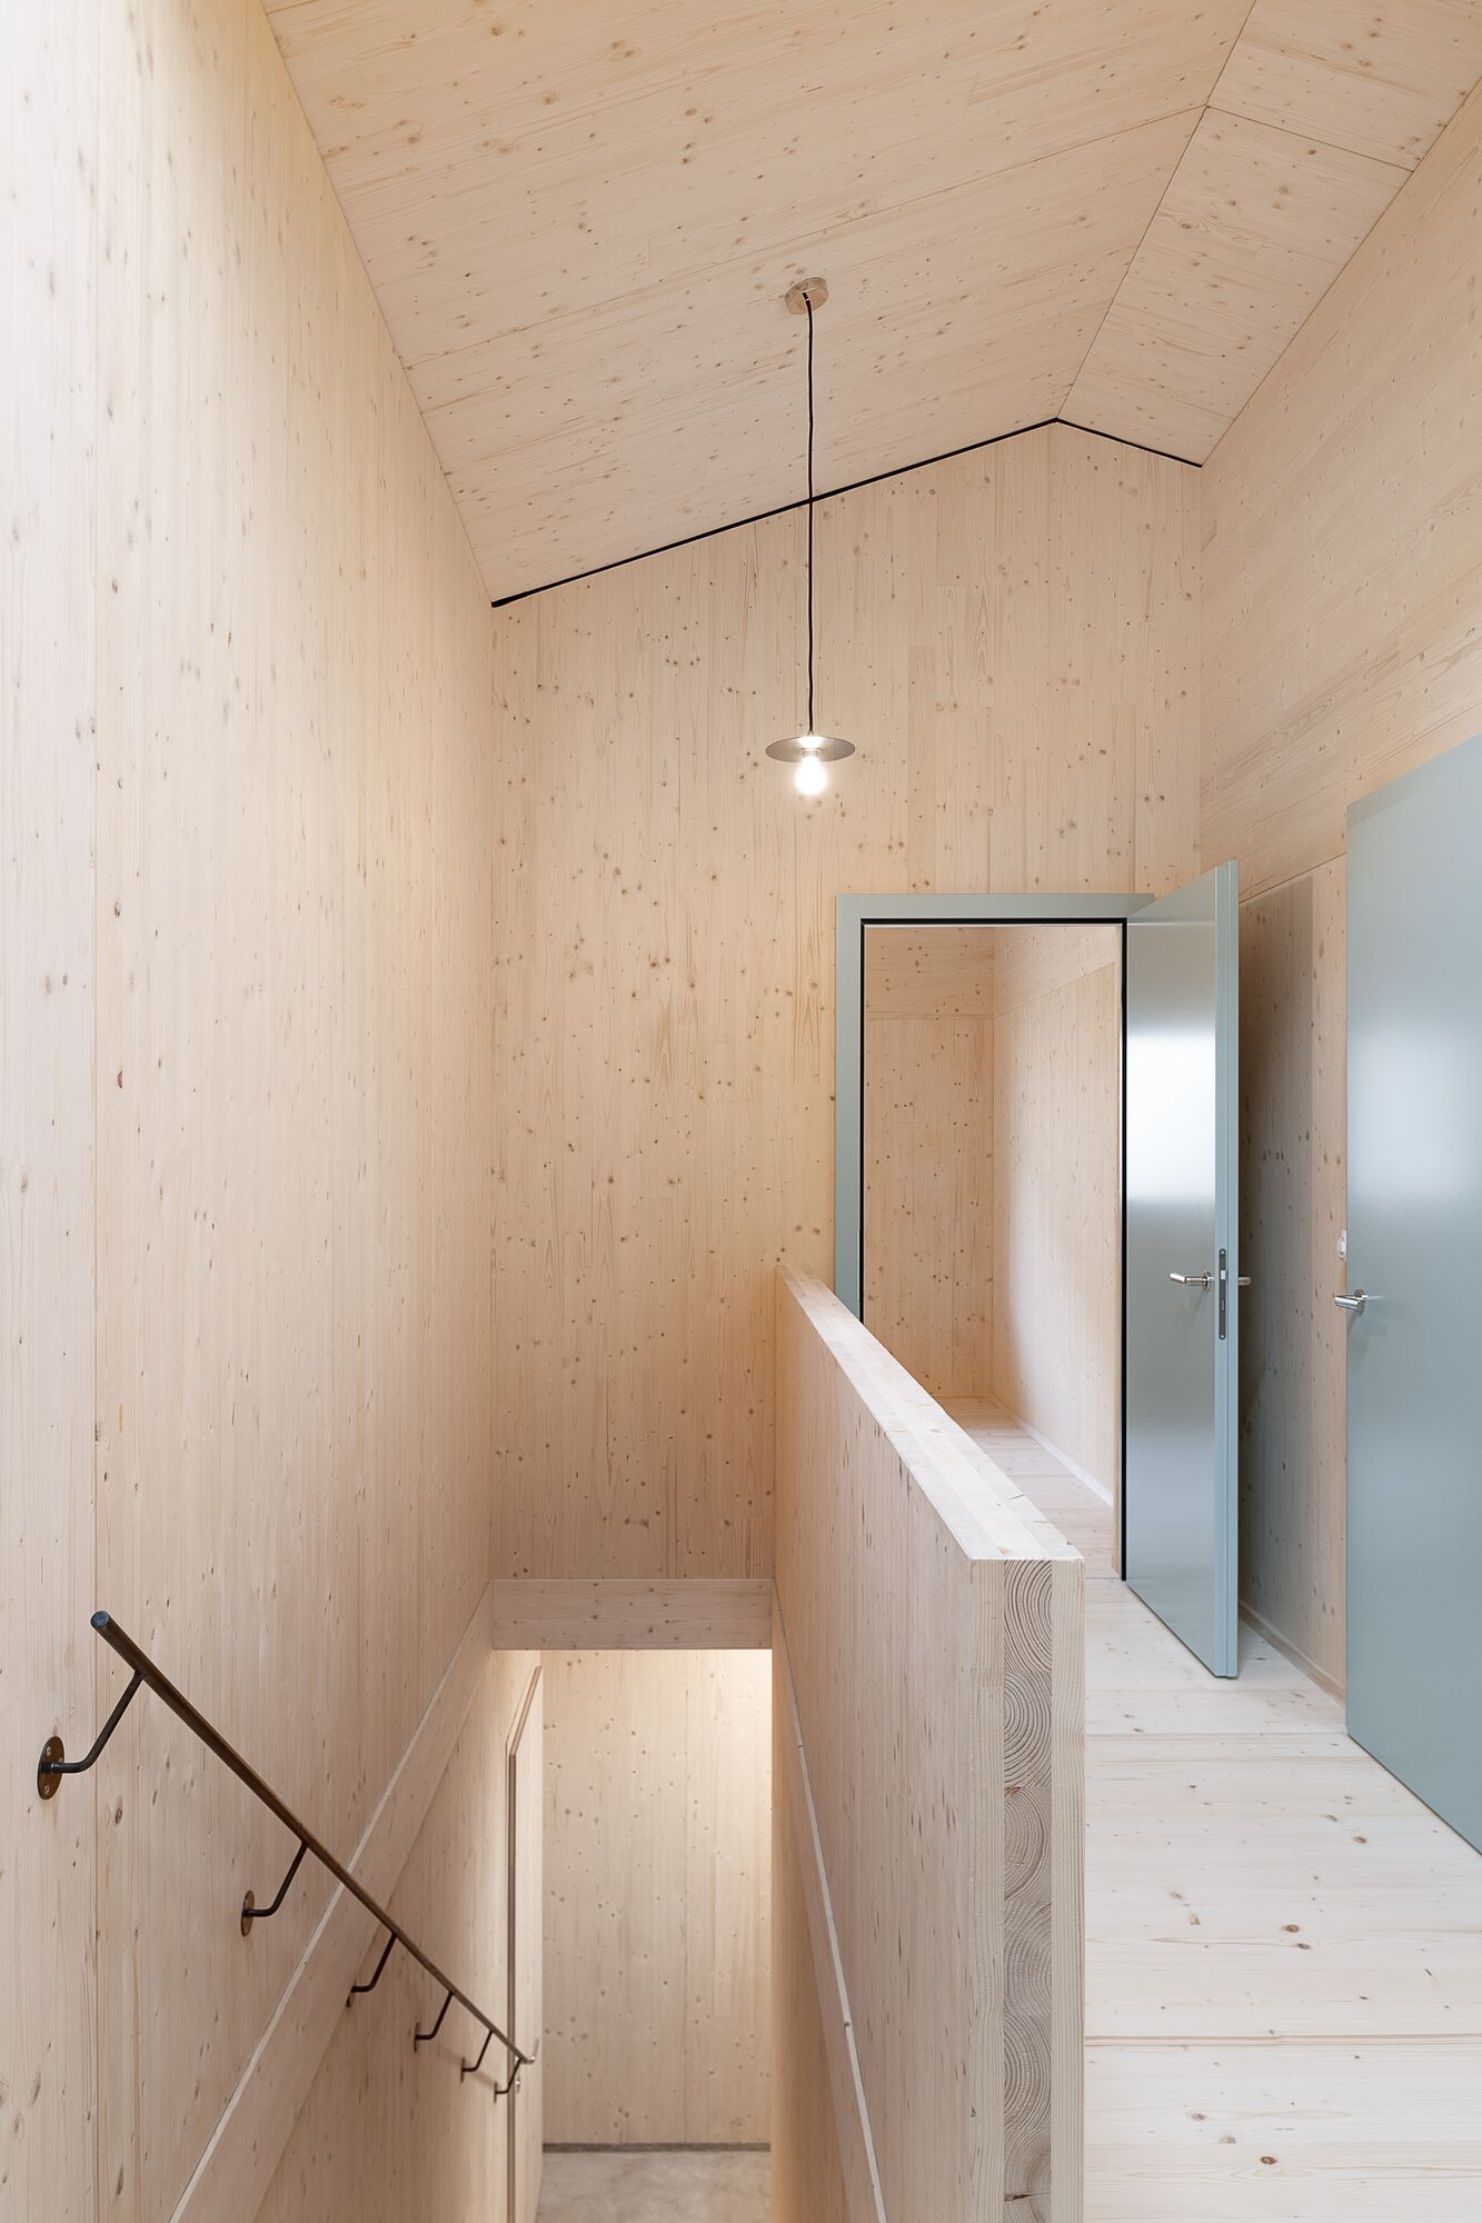 Stairwell and hallway, all in timber